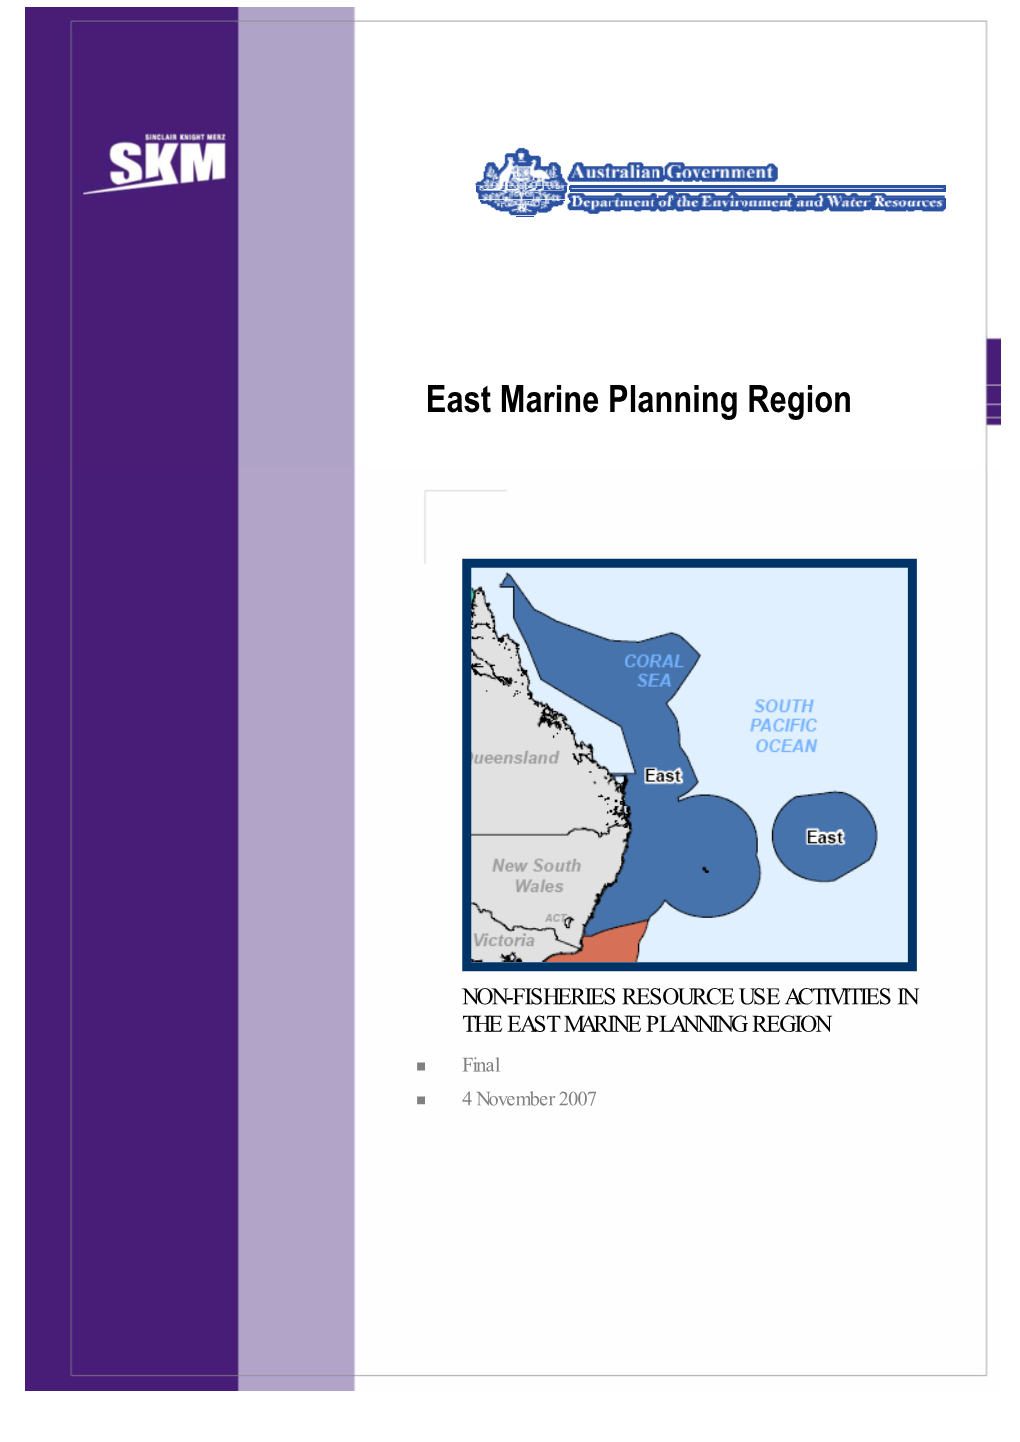 Non-Fisheries Resource Use Activities in the East Marine Region